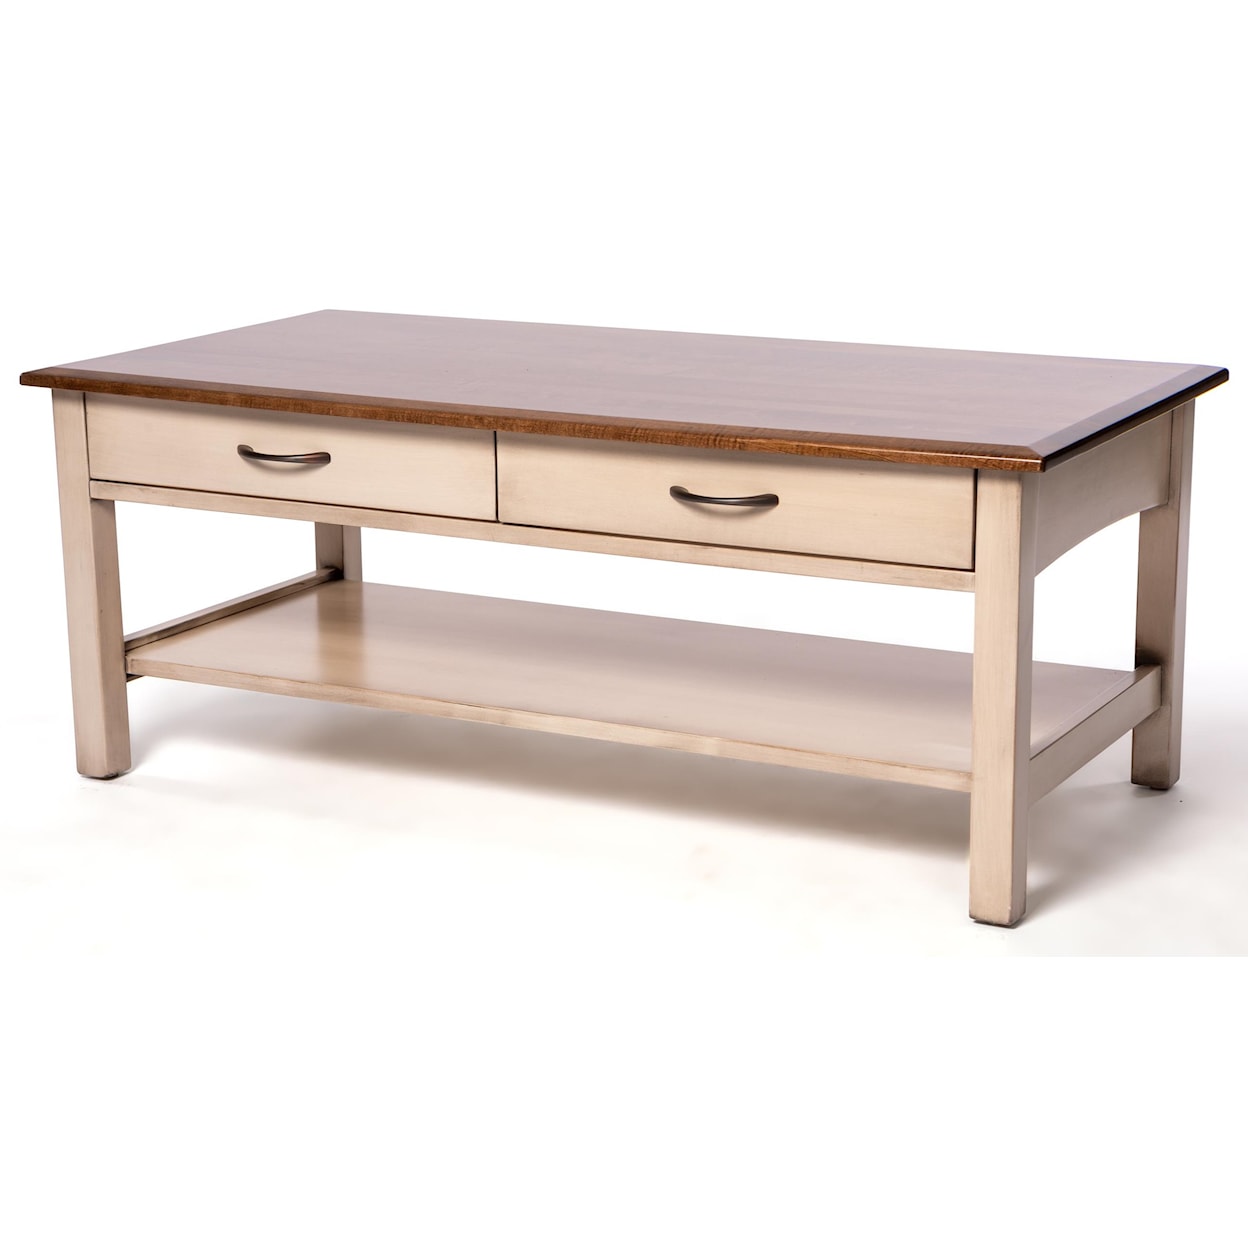 Oakwood Industries Manchester Cocktail Table